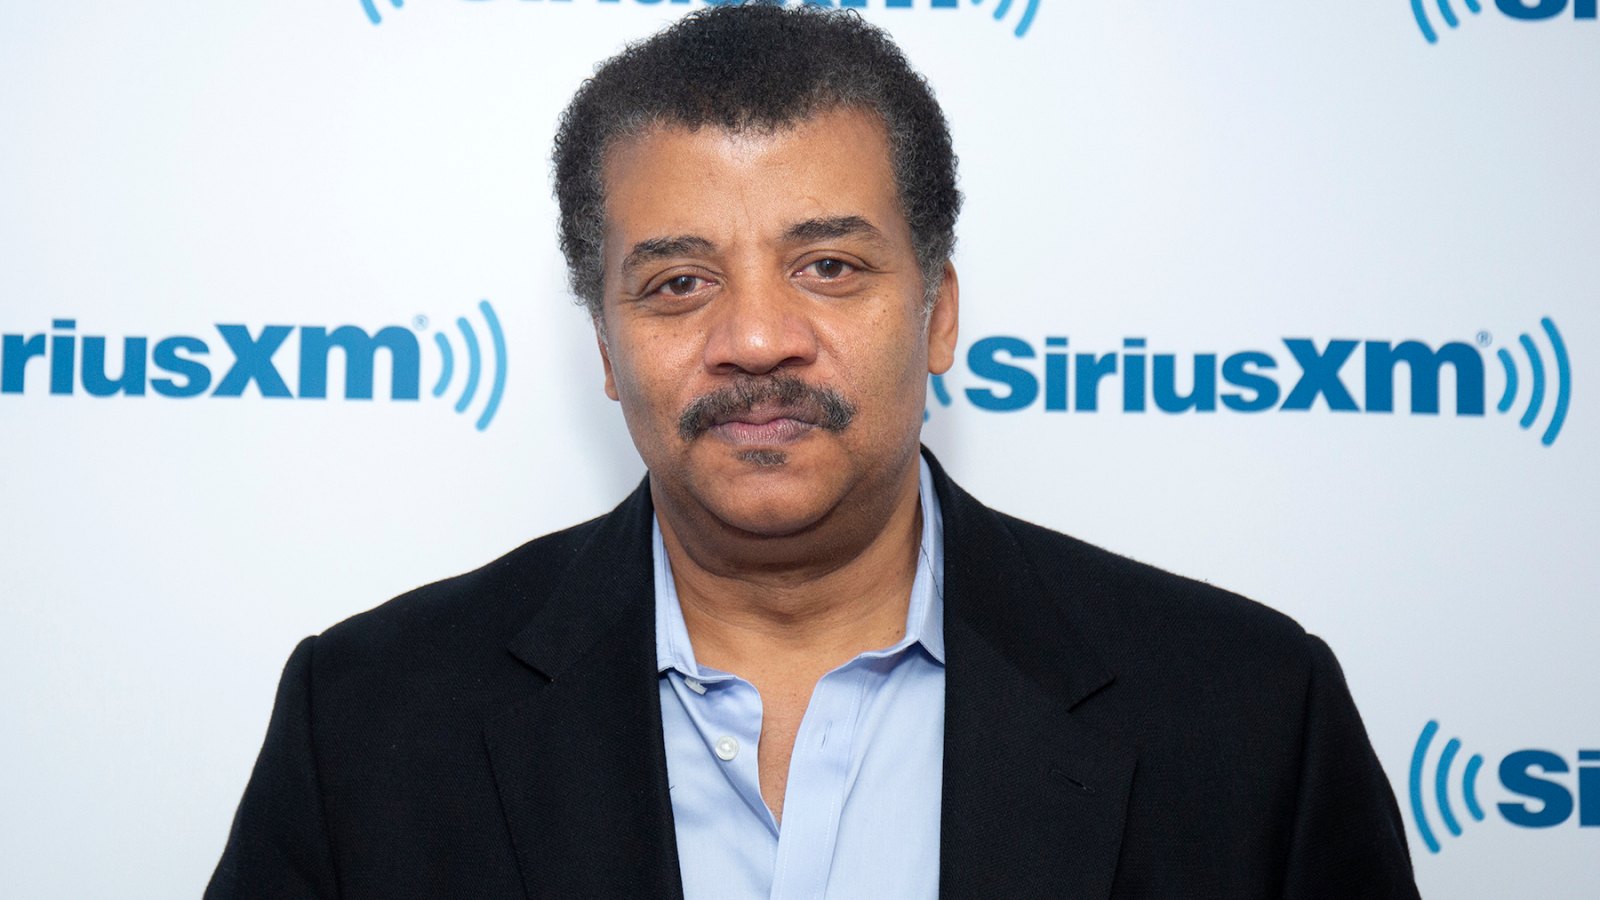 Neil deGrasse Tyson, cosmos, sexual assault, sexual misconduct